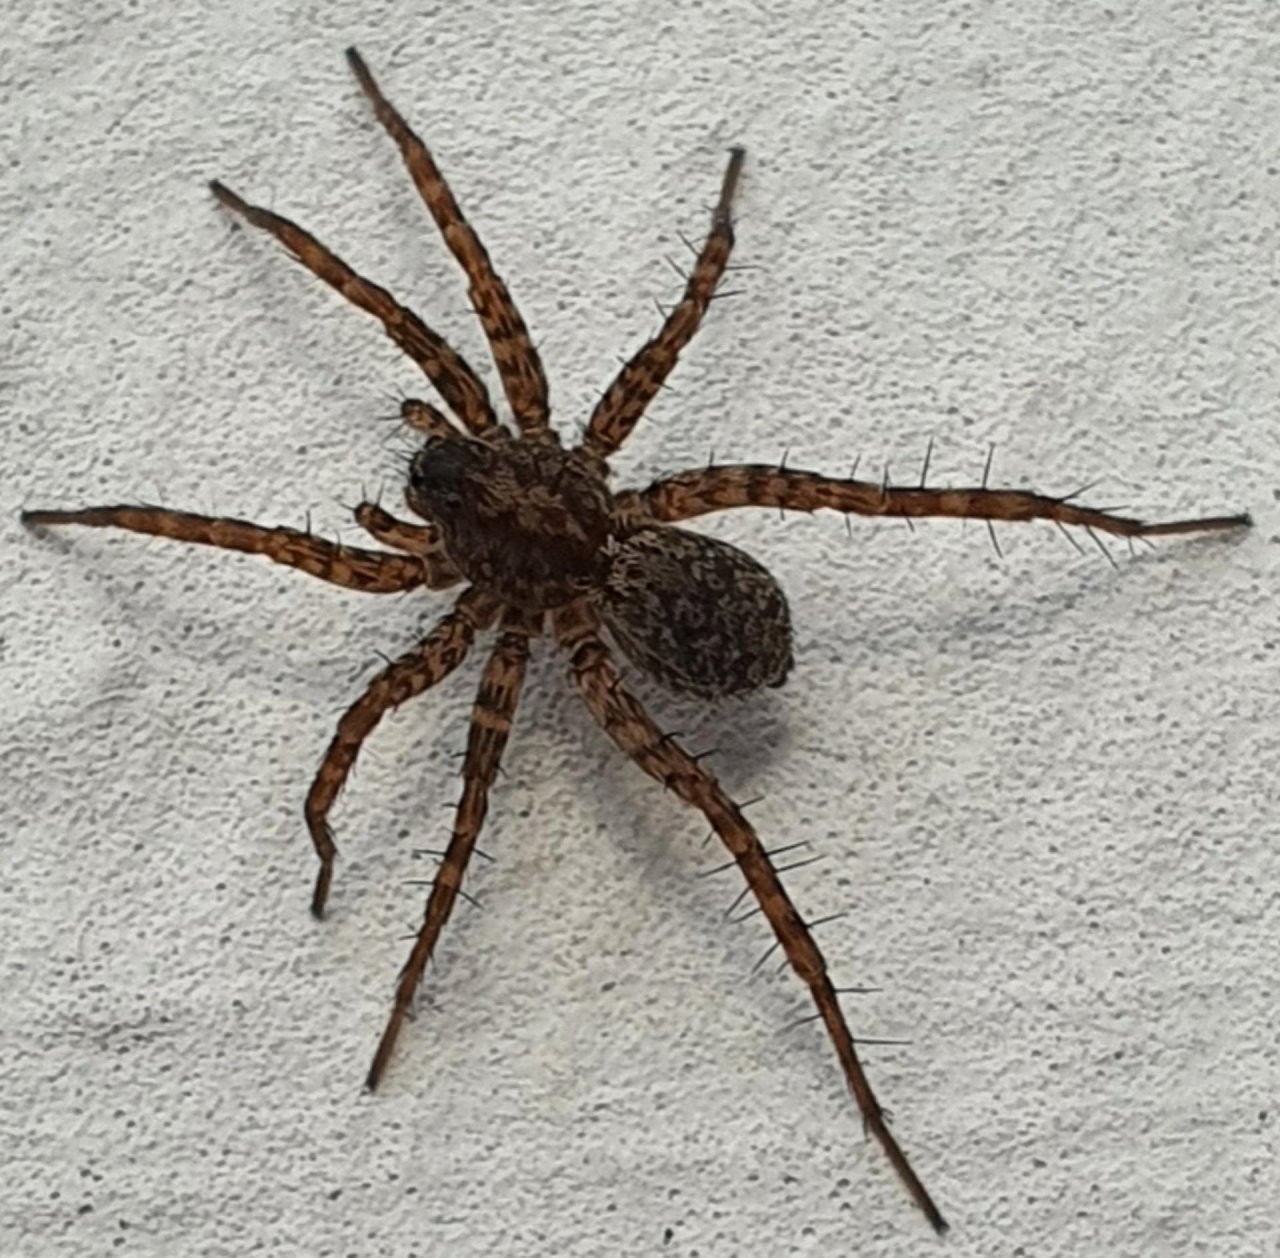 Normal size in SpiderSpotter App spotted by Paul Vernelen on 16.10.2020